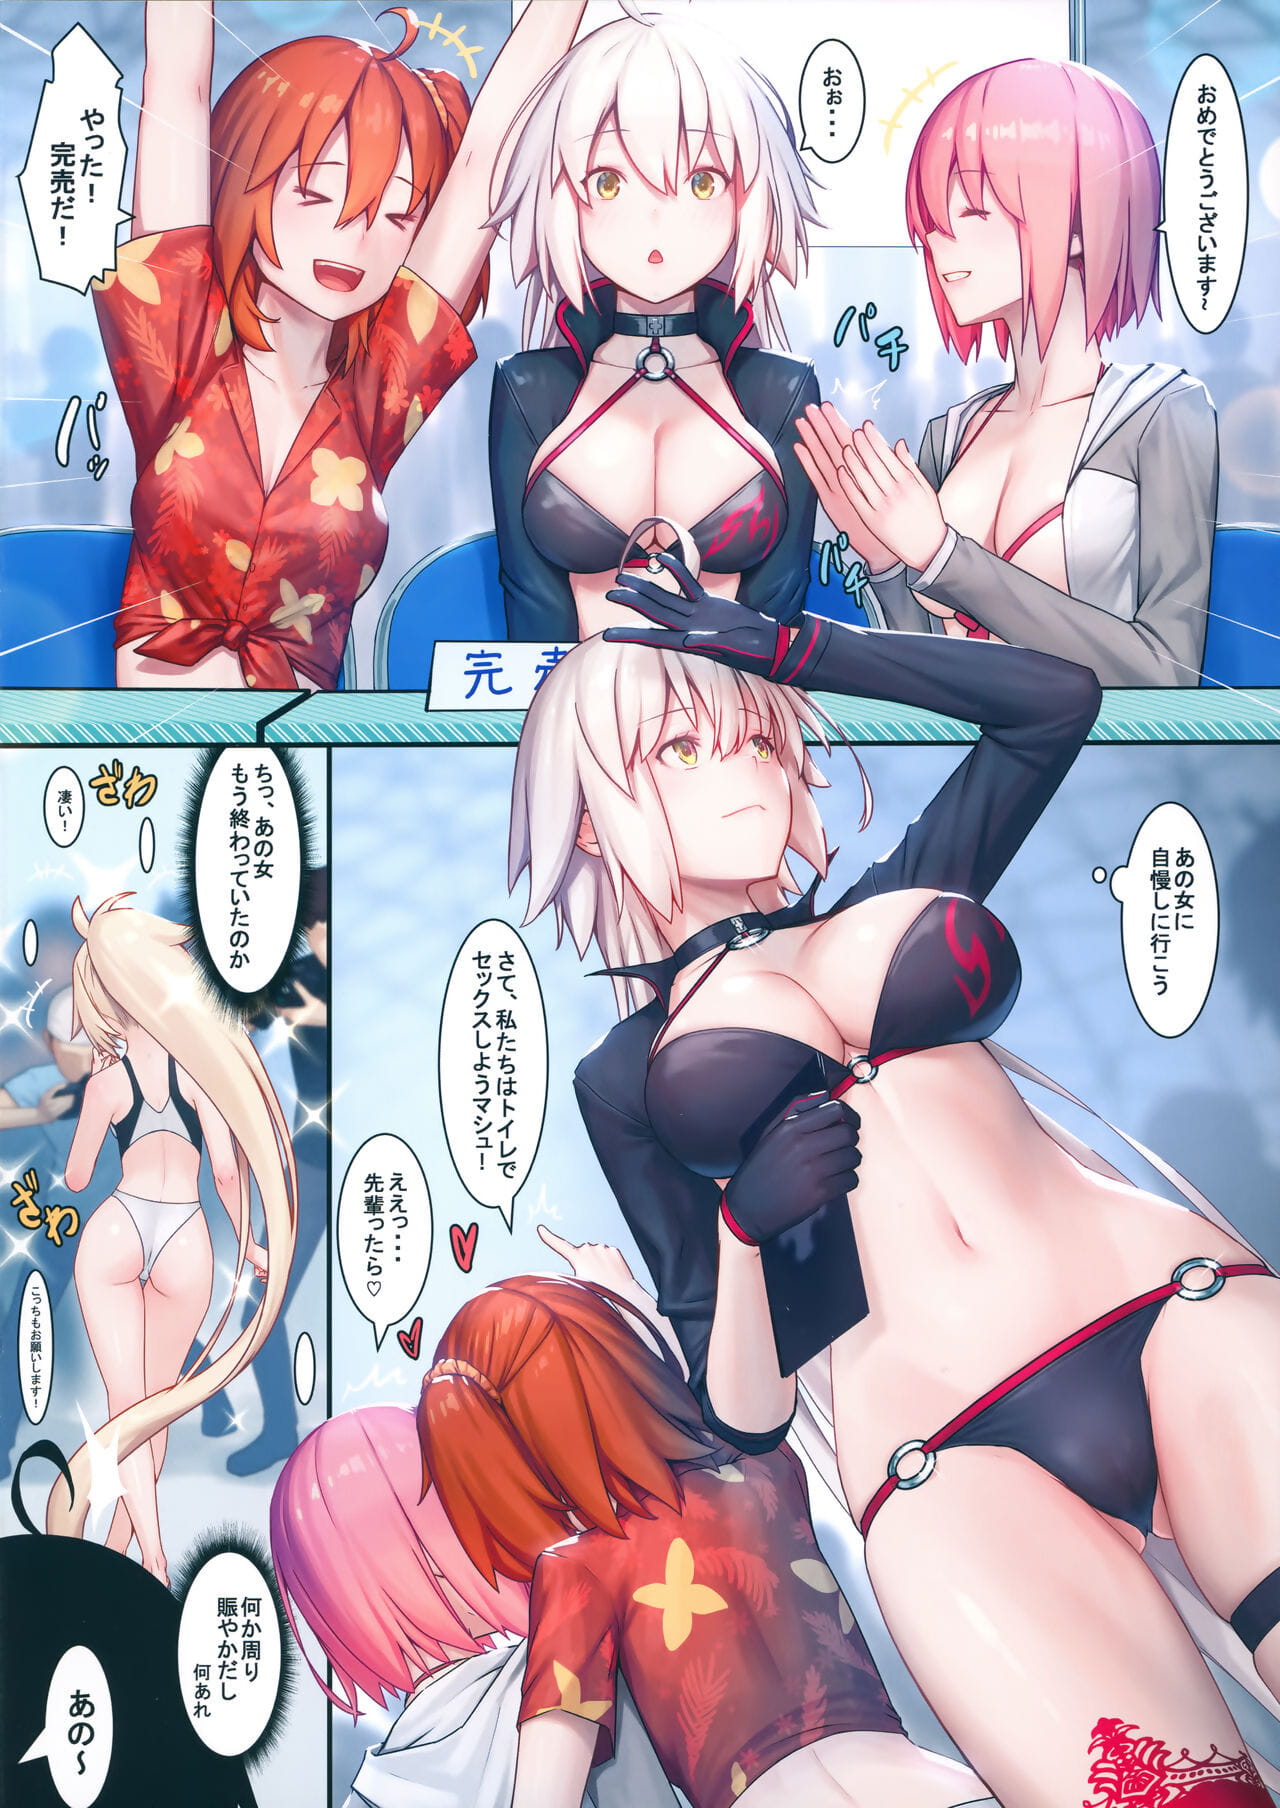 Fate/Gentle Order 4 Alter page 1